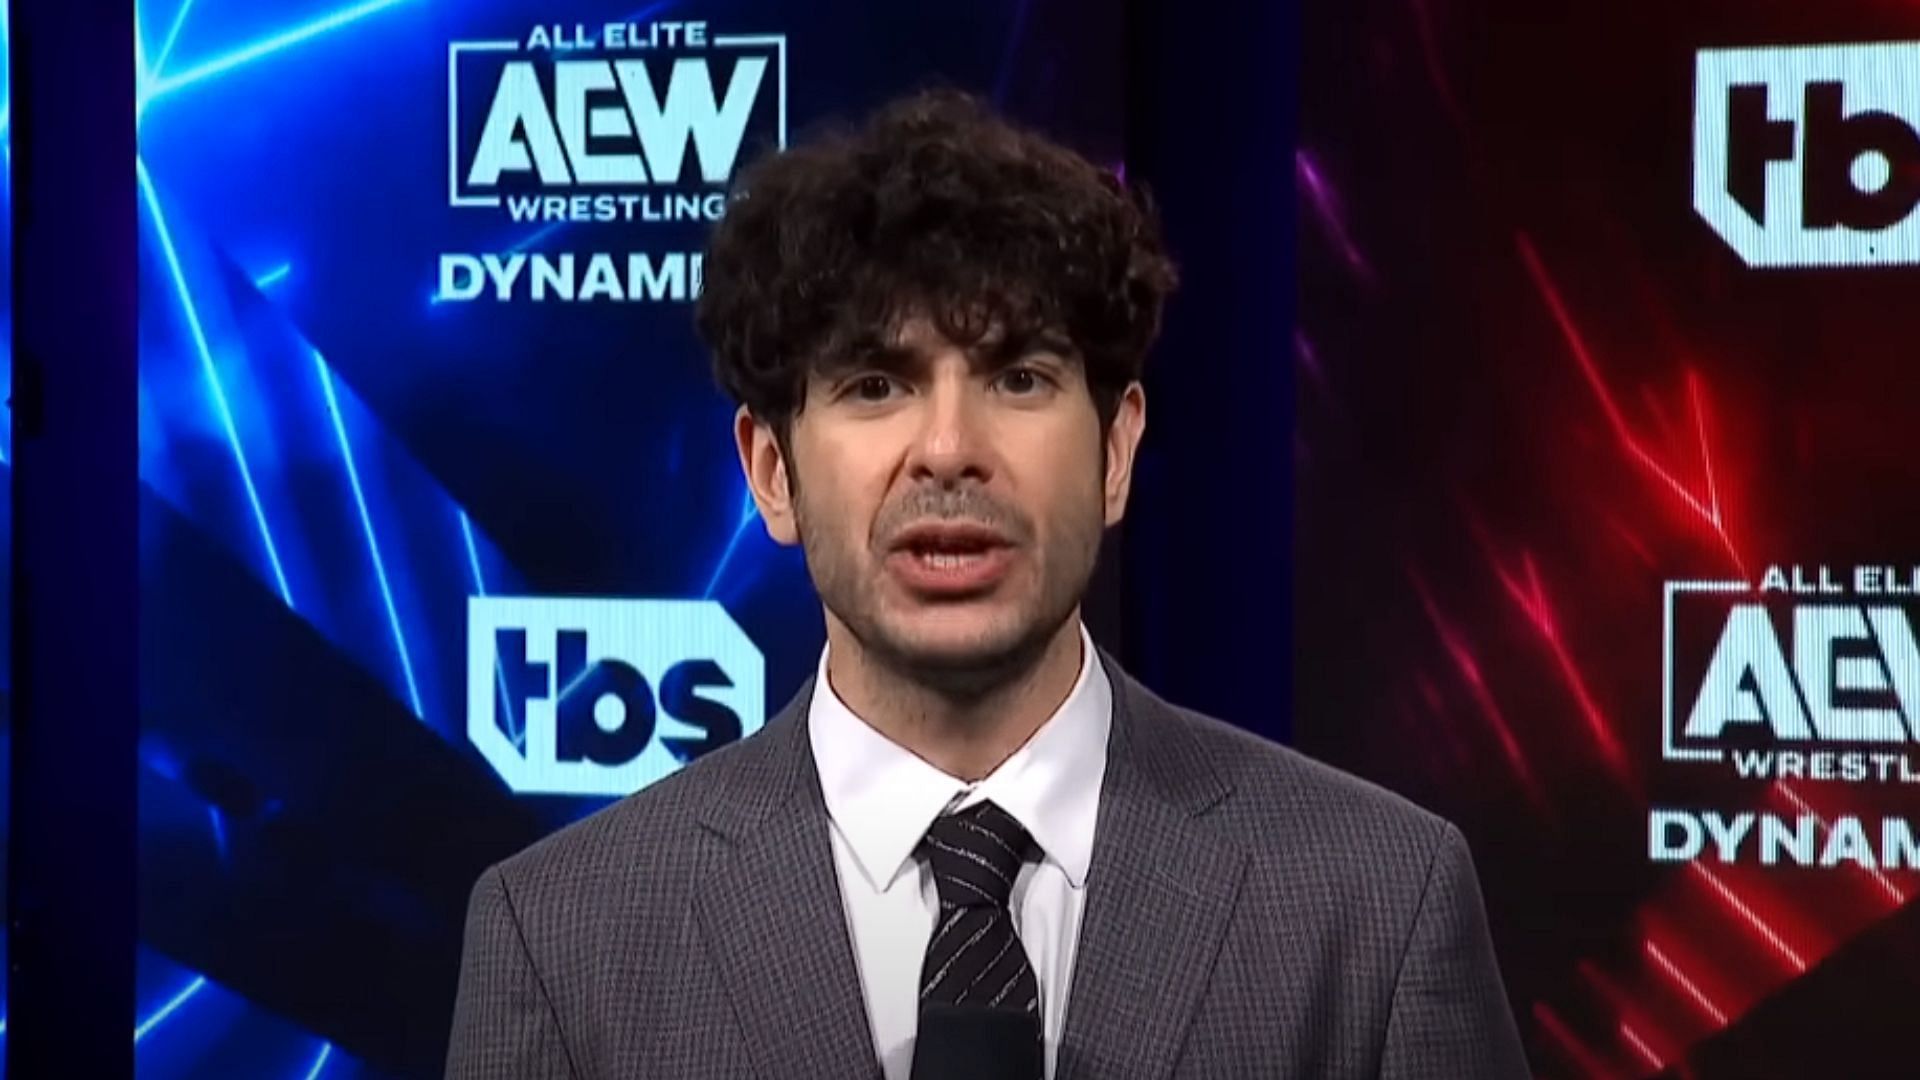 Tony Khan is the president of All Elite Wrestling [Photos courtesy of AEW YouTube Channel]